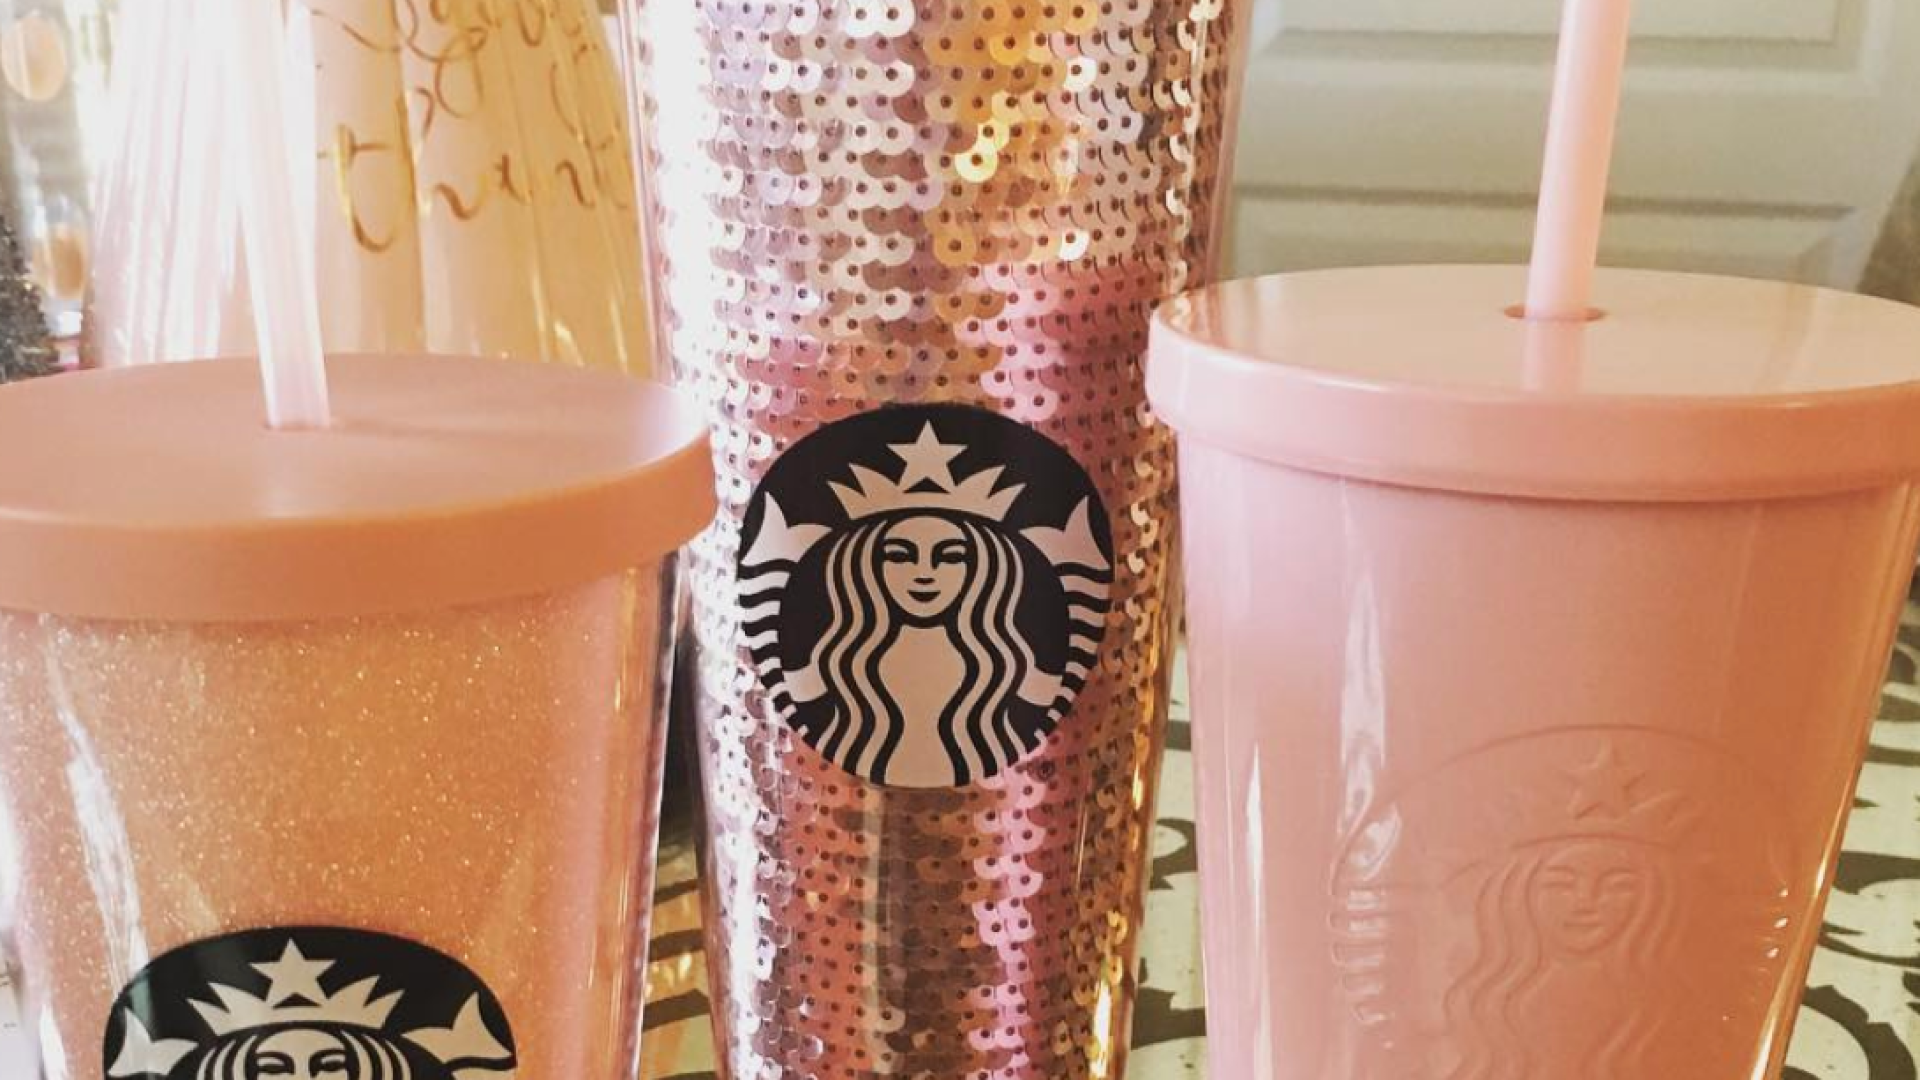 PSA Starbucks now has a rose gold collection of tumblers and